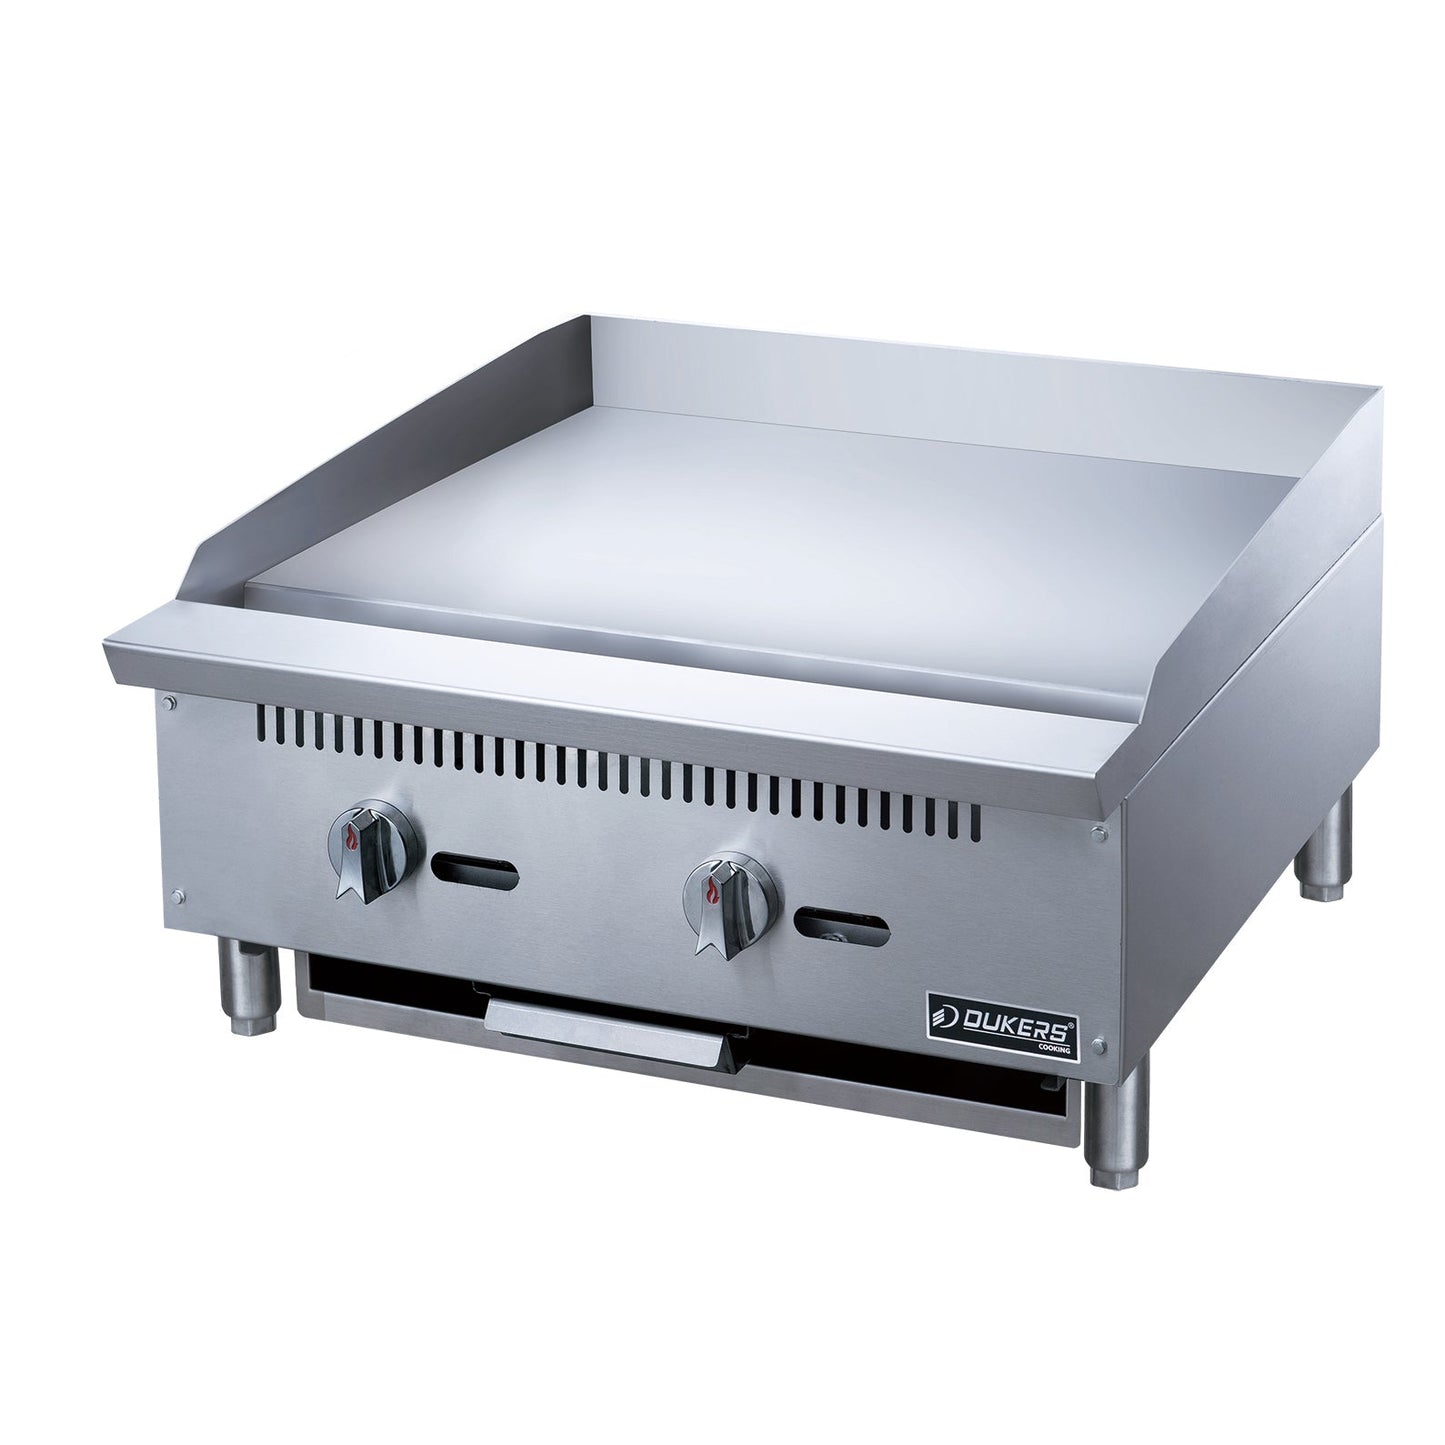 Dukers DCGM24 24 inch Heavy Duty Griddle